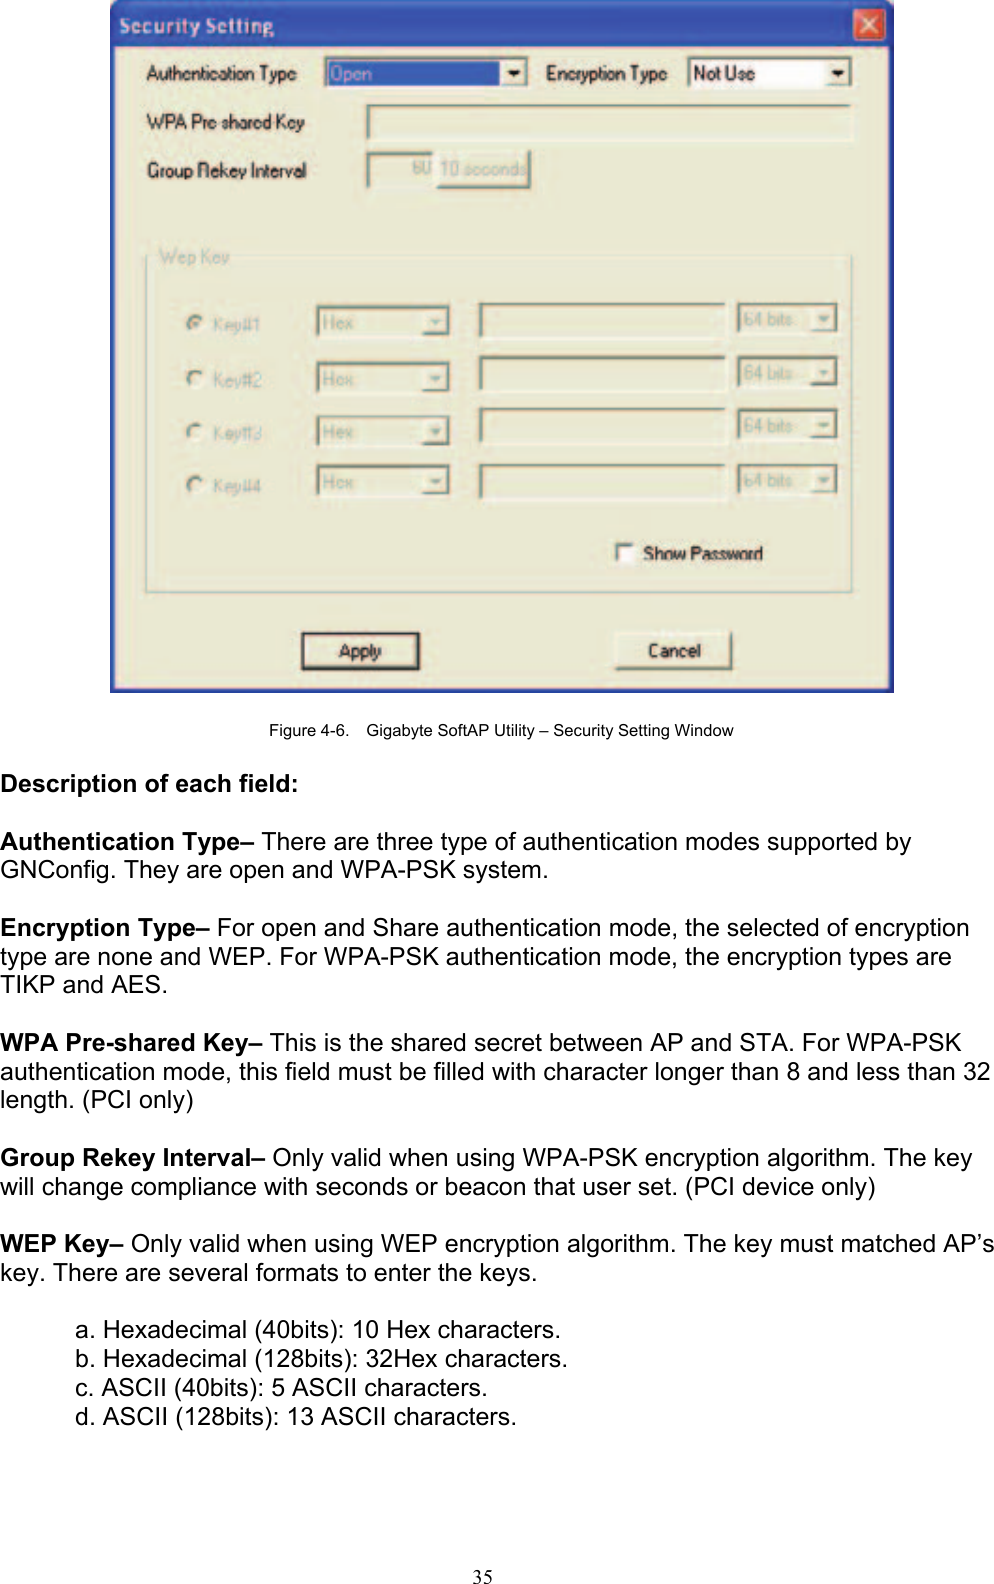 35     Figure 4-6.    Gigabyte SoftAP Utility – Security Setting Window  Description of each field:  Authentication Type– There are three type of authentication modes supported by GNConfig. They are open and WPA-PSK system.  Encryption Type– For open and Share authentication mode, the selected of encryption type are none and WEP. For WPA-PSK authentication mode, the encryption types are TIKP and AES.  WPA Pre-shared Key– This is the shared secret between AP and STA. For WPA-PSK authentication mode, this field must be filled with character longer than 8 and less than 32 length. (PCI only)  Group Rekey Interval– Only valid when using WPA-PSK encryption algorithm. The key will change compliance with seconds or beacon that user set. (PCI device only)  WEP Key– Only valid when using WEP encryption algorithm. The key must matched AP’s key. There are several formats to enter the keys.  a. Hexadecimal (40bits): 10 Hex characters. b. Hexadecimal (128bits): 32Hex characters. c. ASCII (40bits): 5 ASCII characters. d. ASCII (128bits): 13 ASCII characters.    